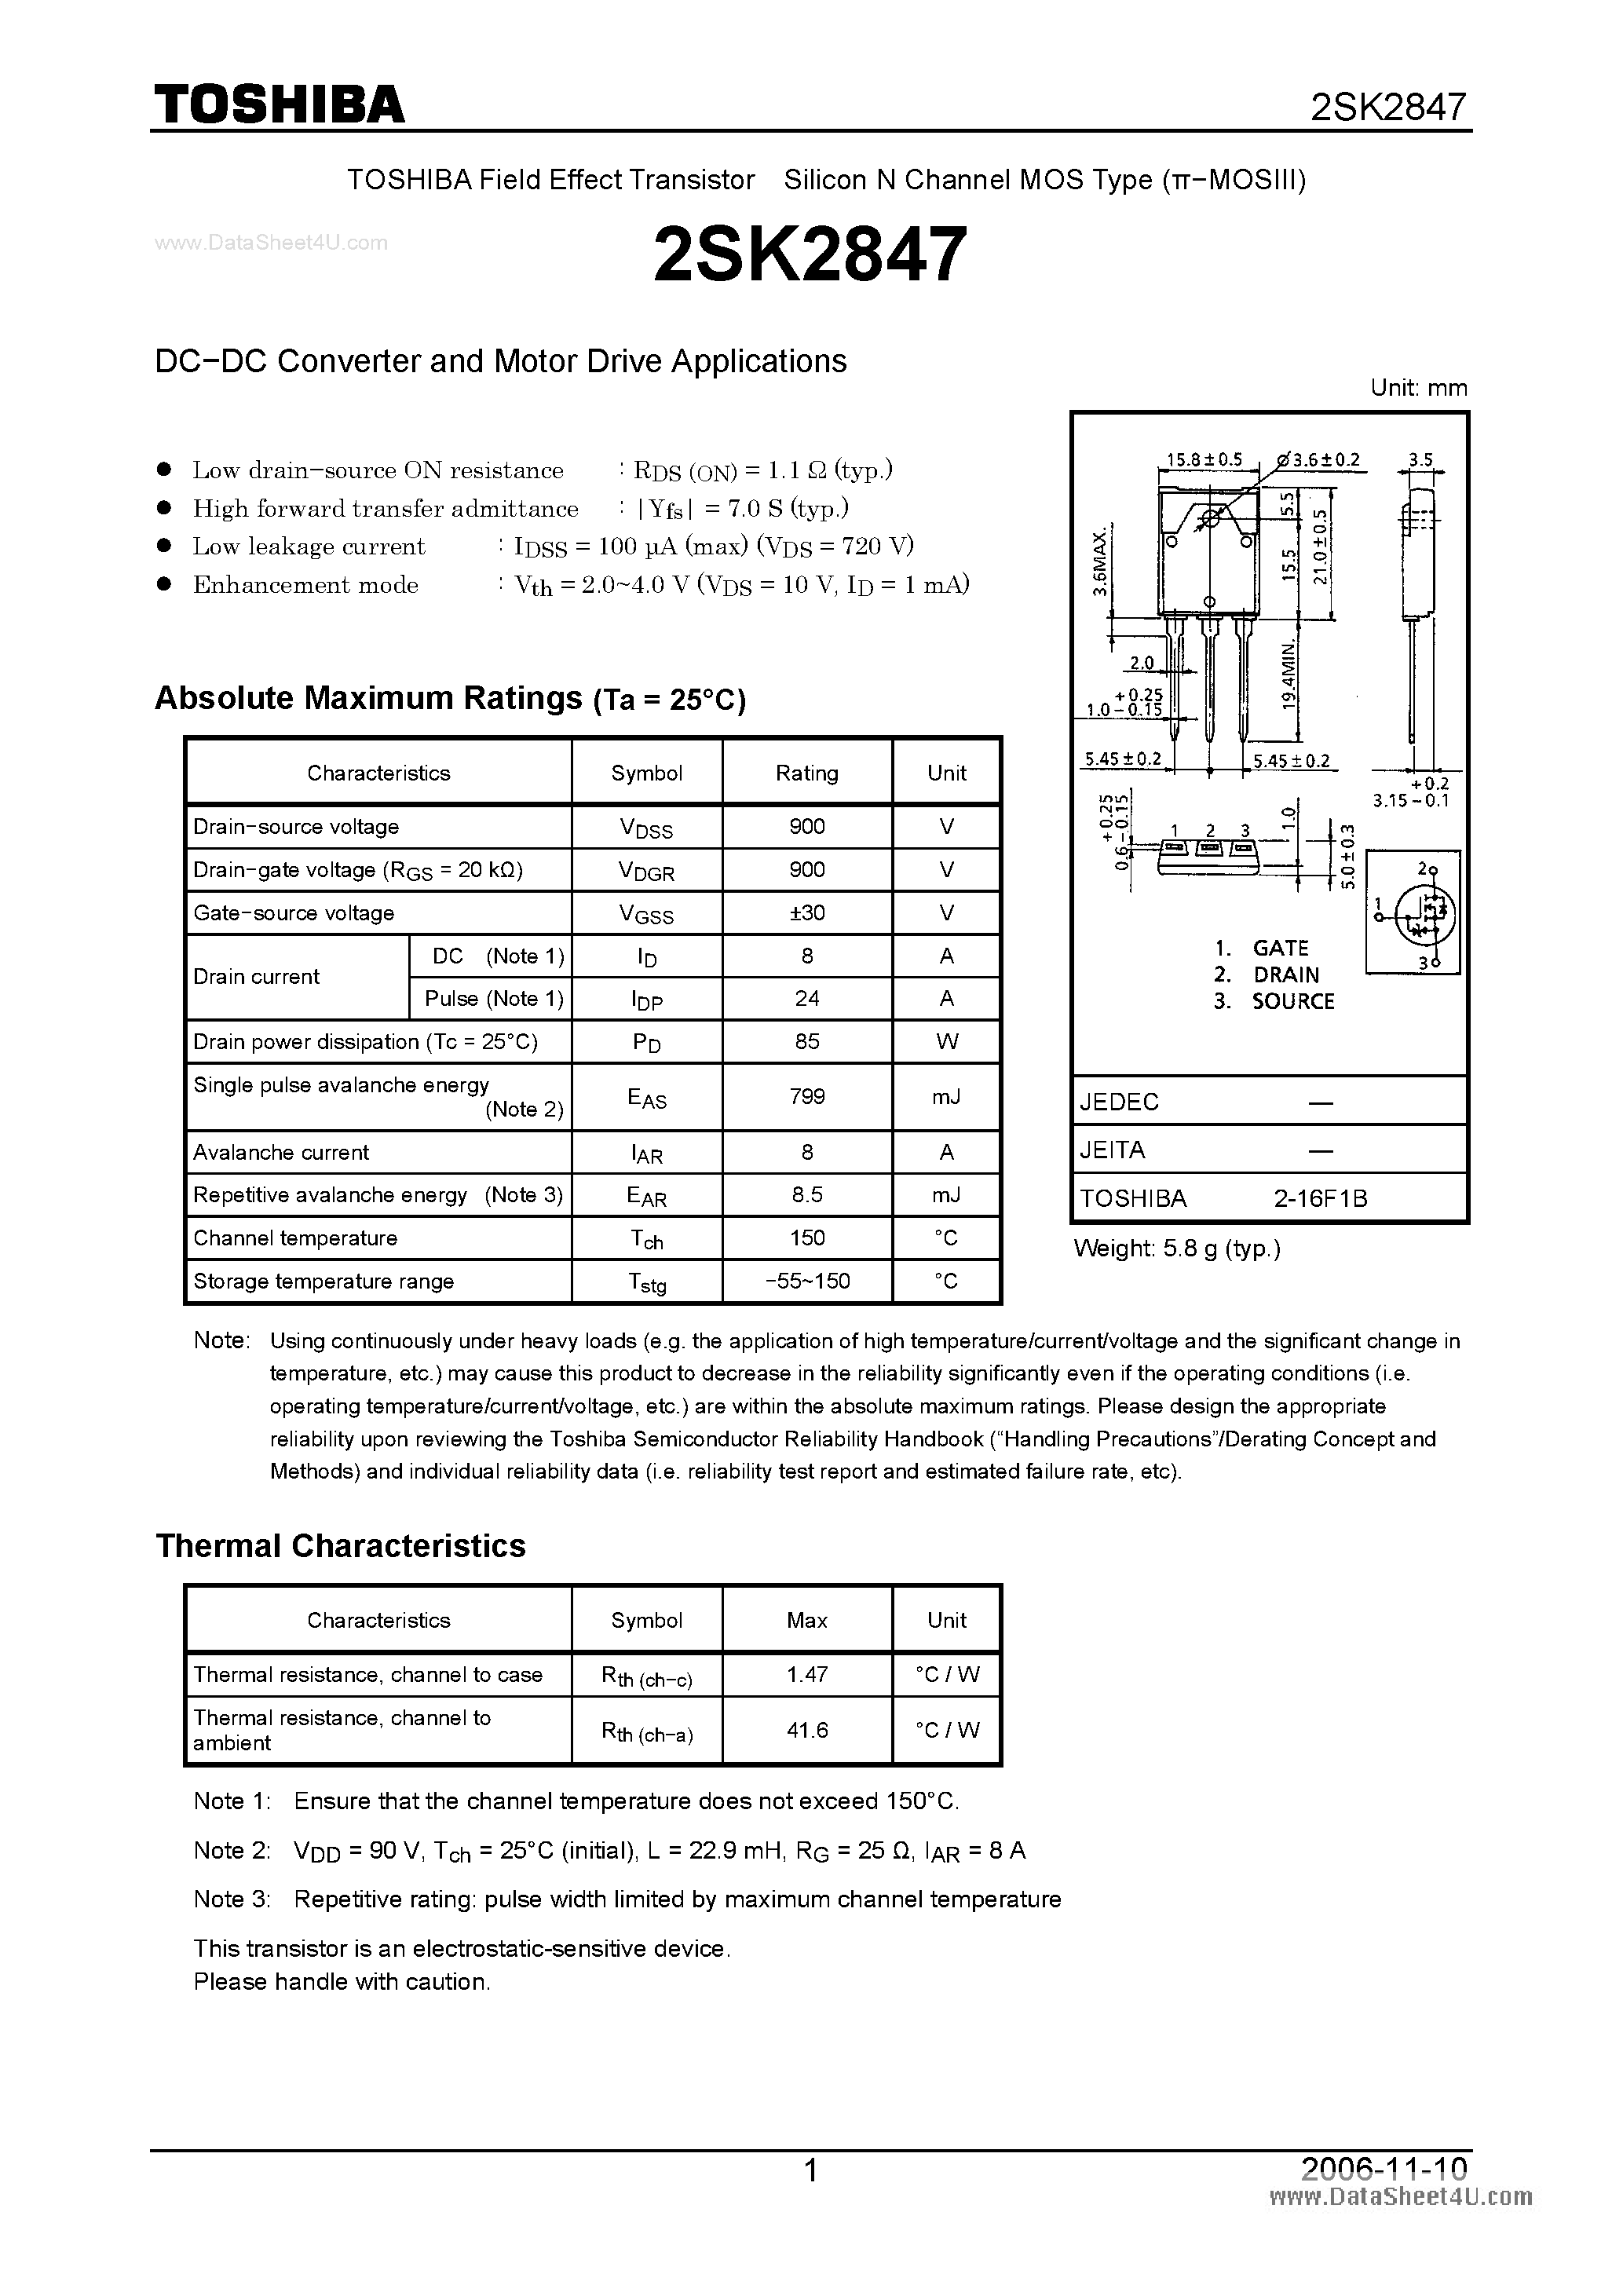 Datasheet K2847 - Search -----> 2SK2847 page 1